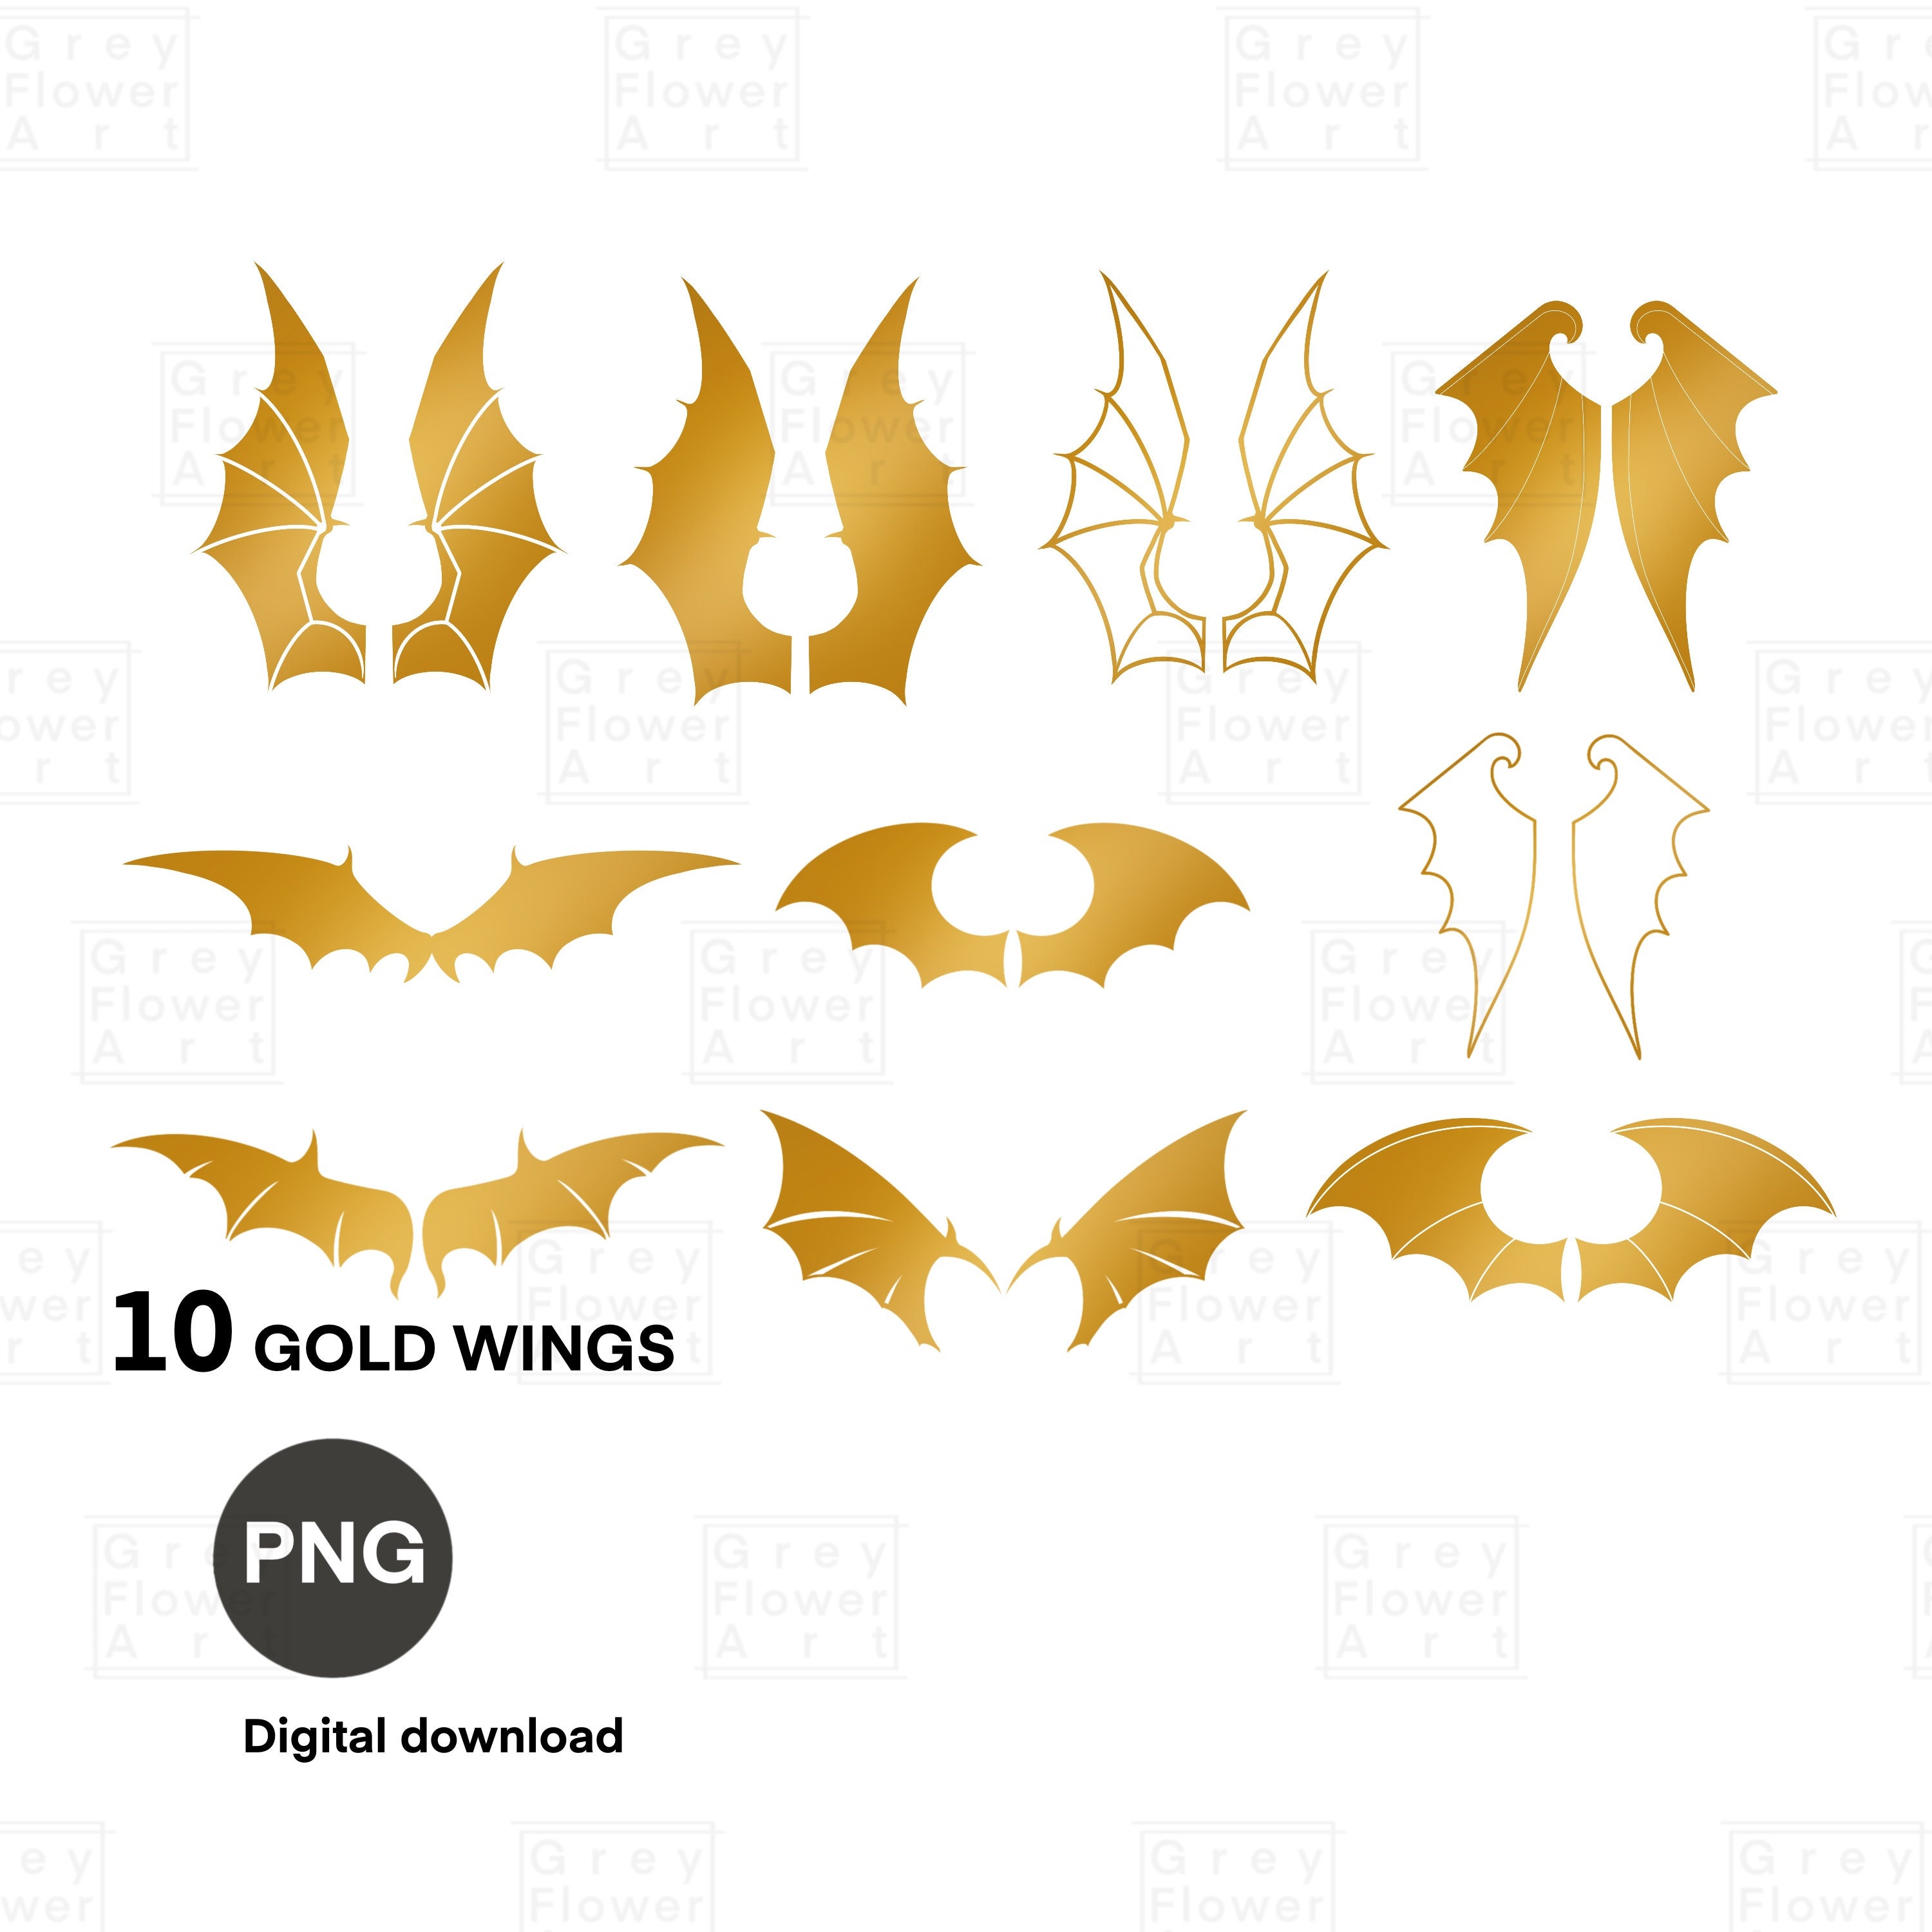 Gold Angel Wings Sublimation Clipart PNG Graphic by A Design